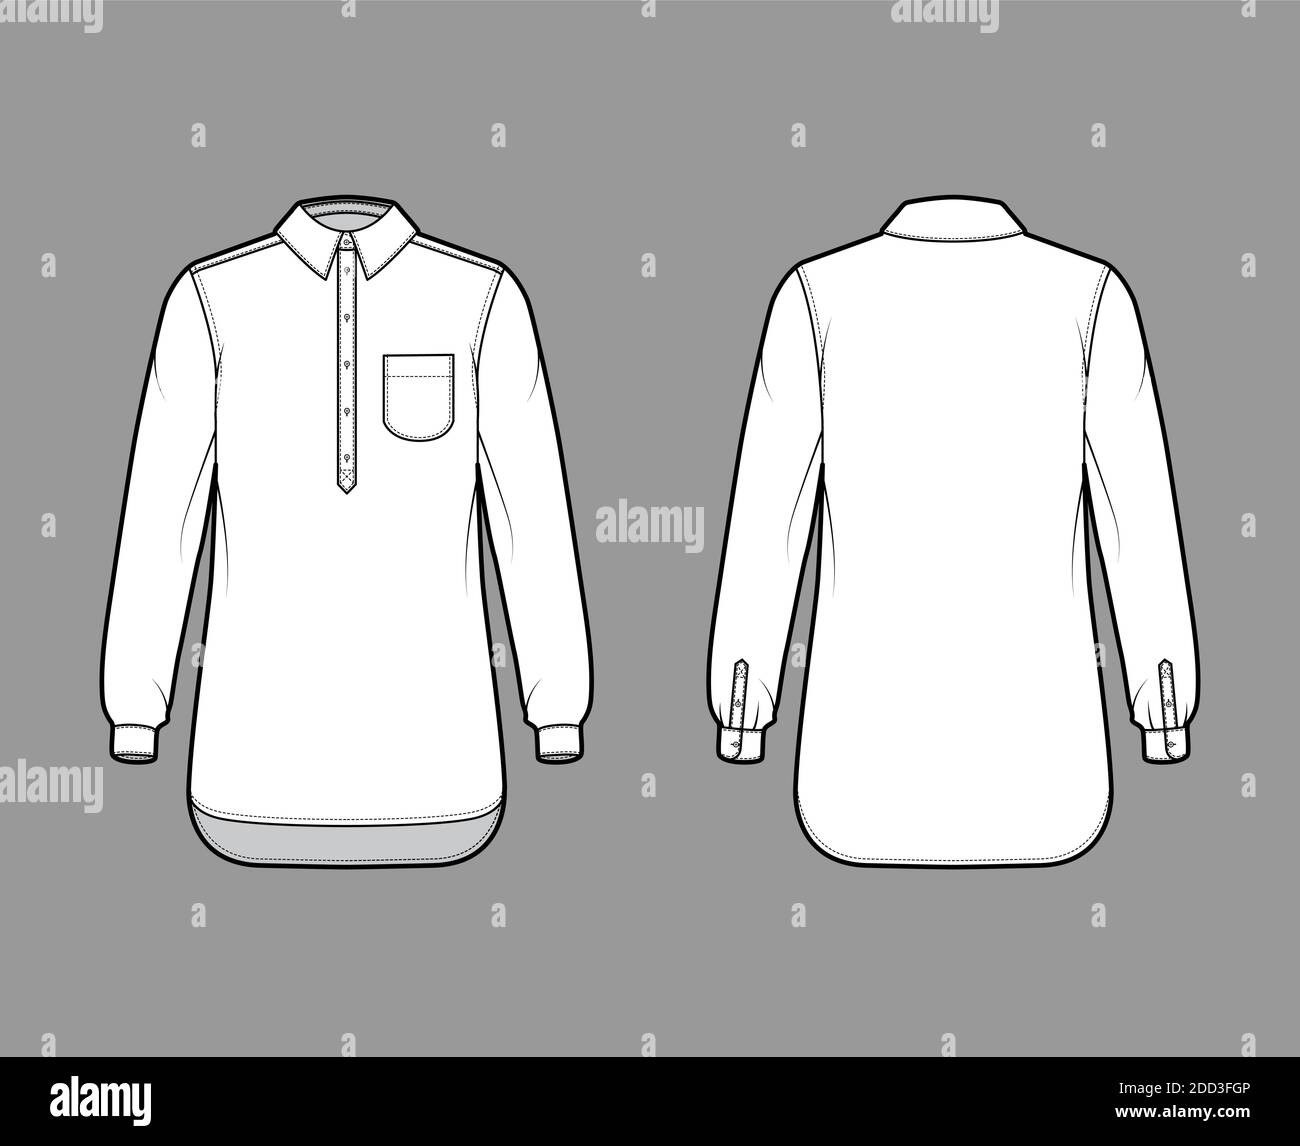 Shirt pullover technical fashion illustration with rounded pocket, long ...